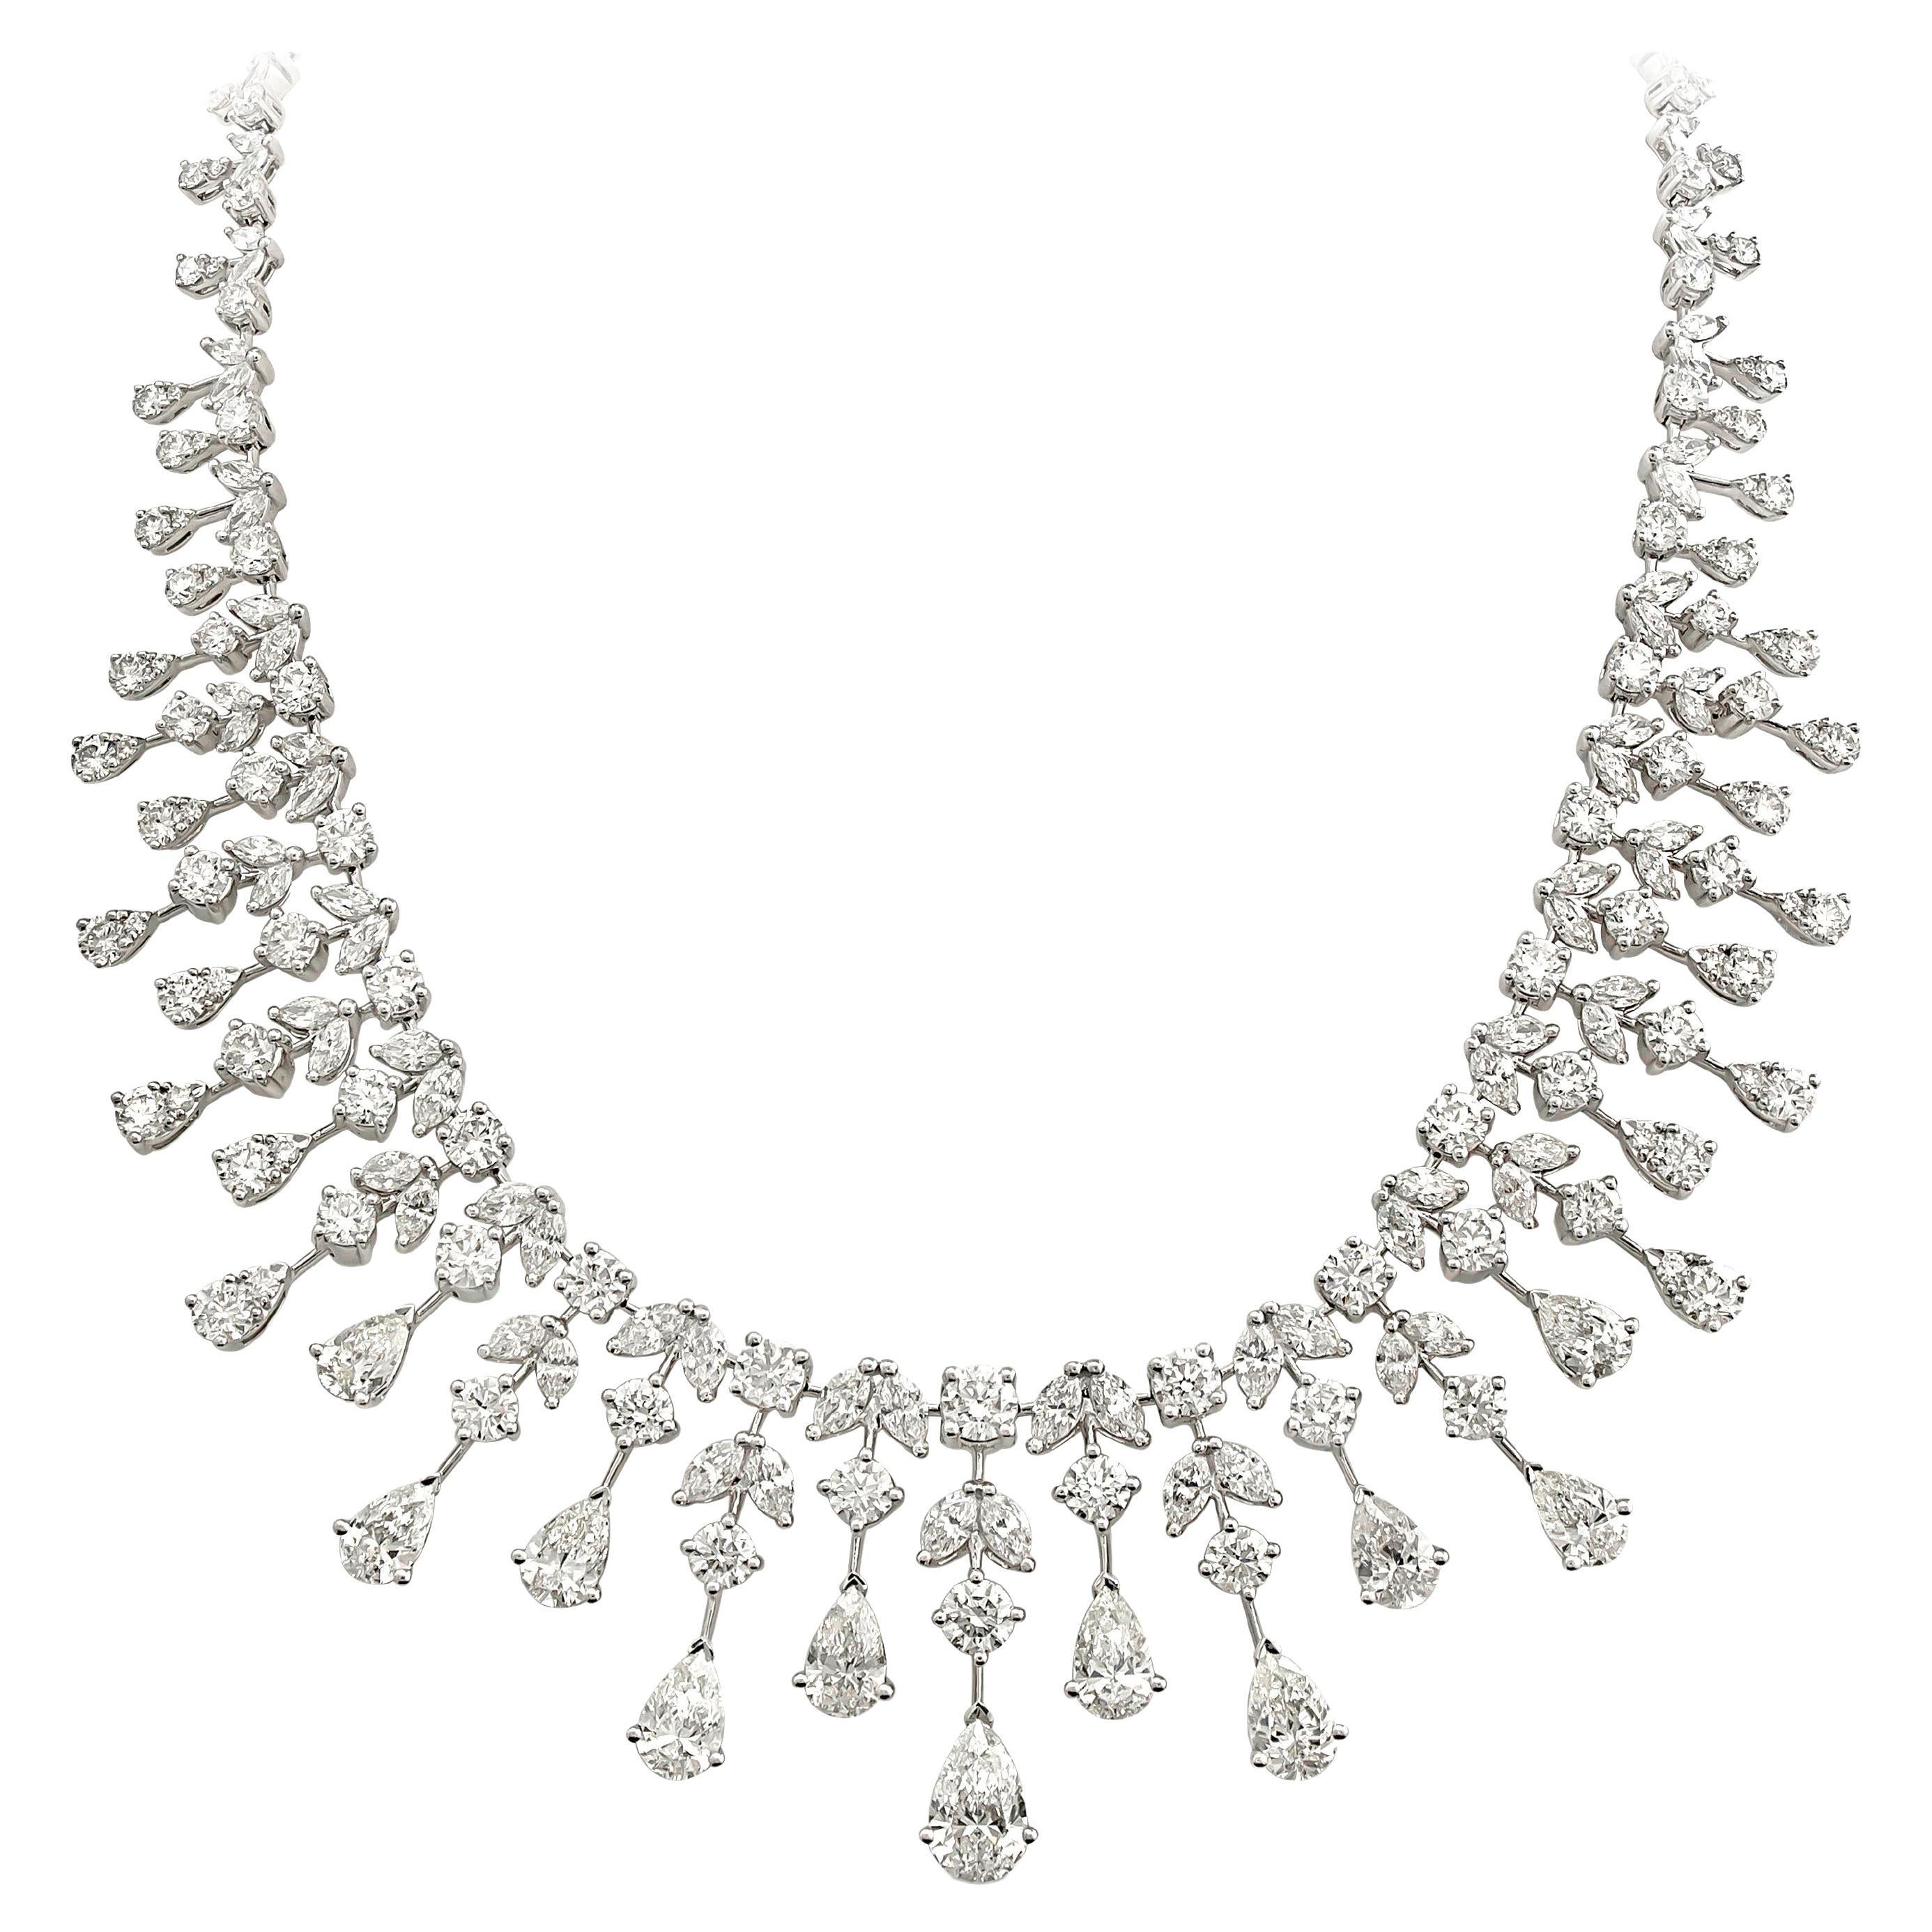 Luxurious and elegantly made diamond chandelier necklace showcasing 276 pieces brilliant mixed cut round, pear and marquise shape diamonds weighing 37.20 carats total. Set in a graduating chandelier diamond drop design. Five pear shape diamonds are